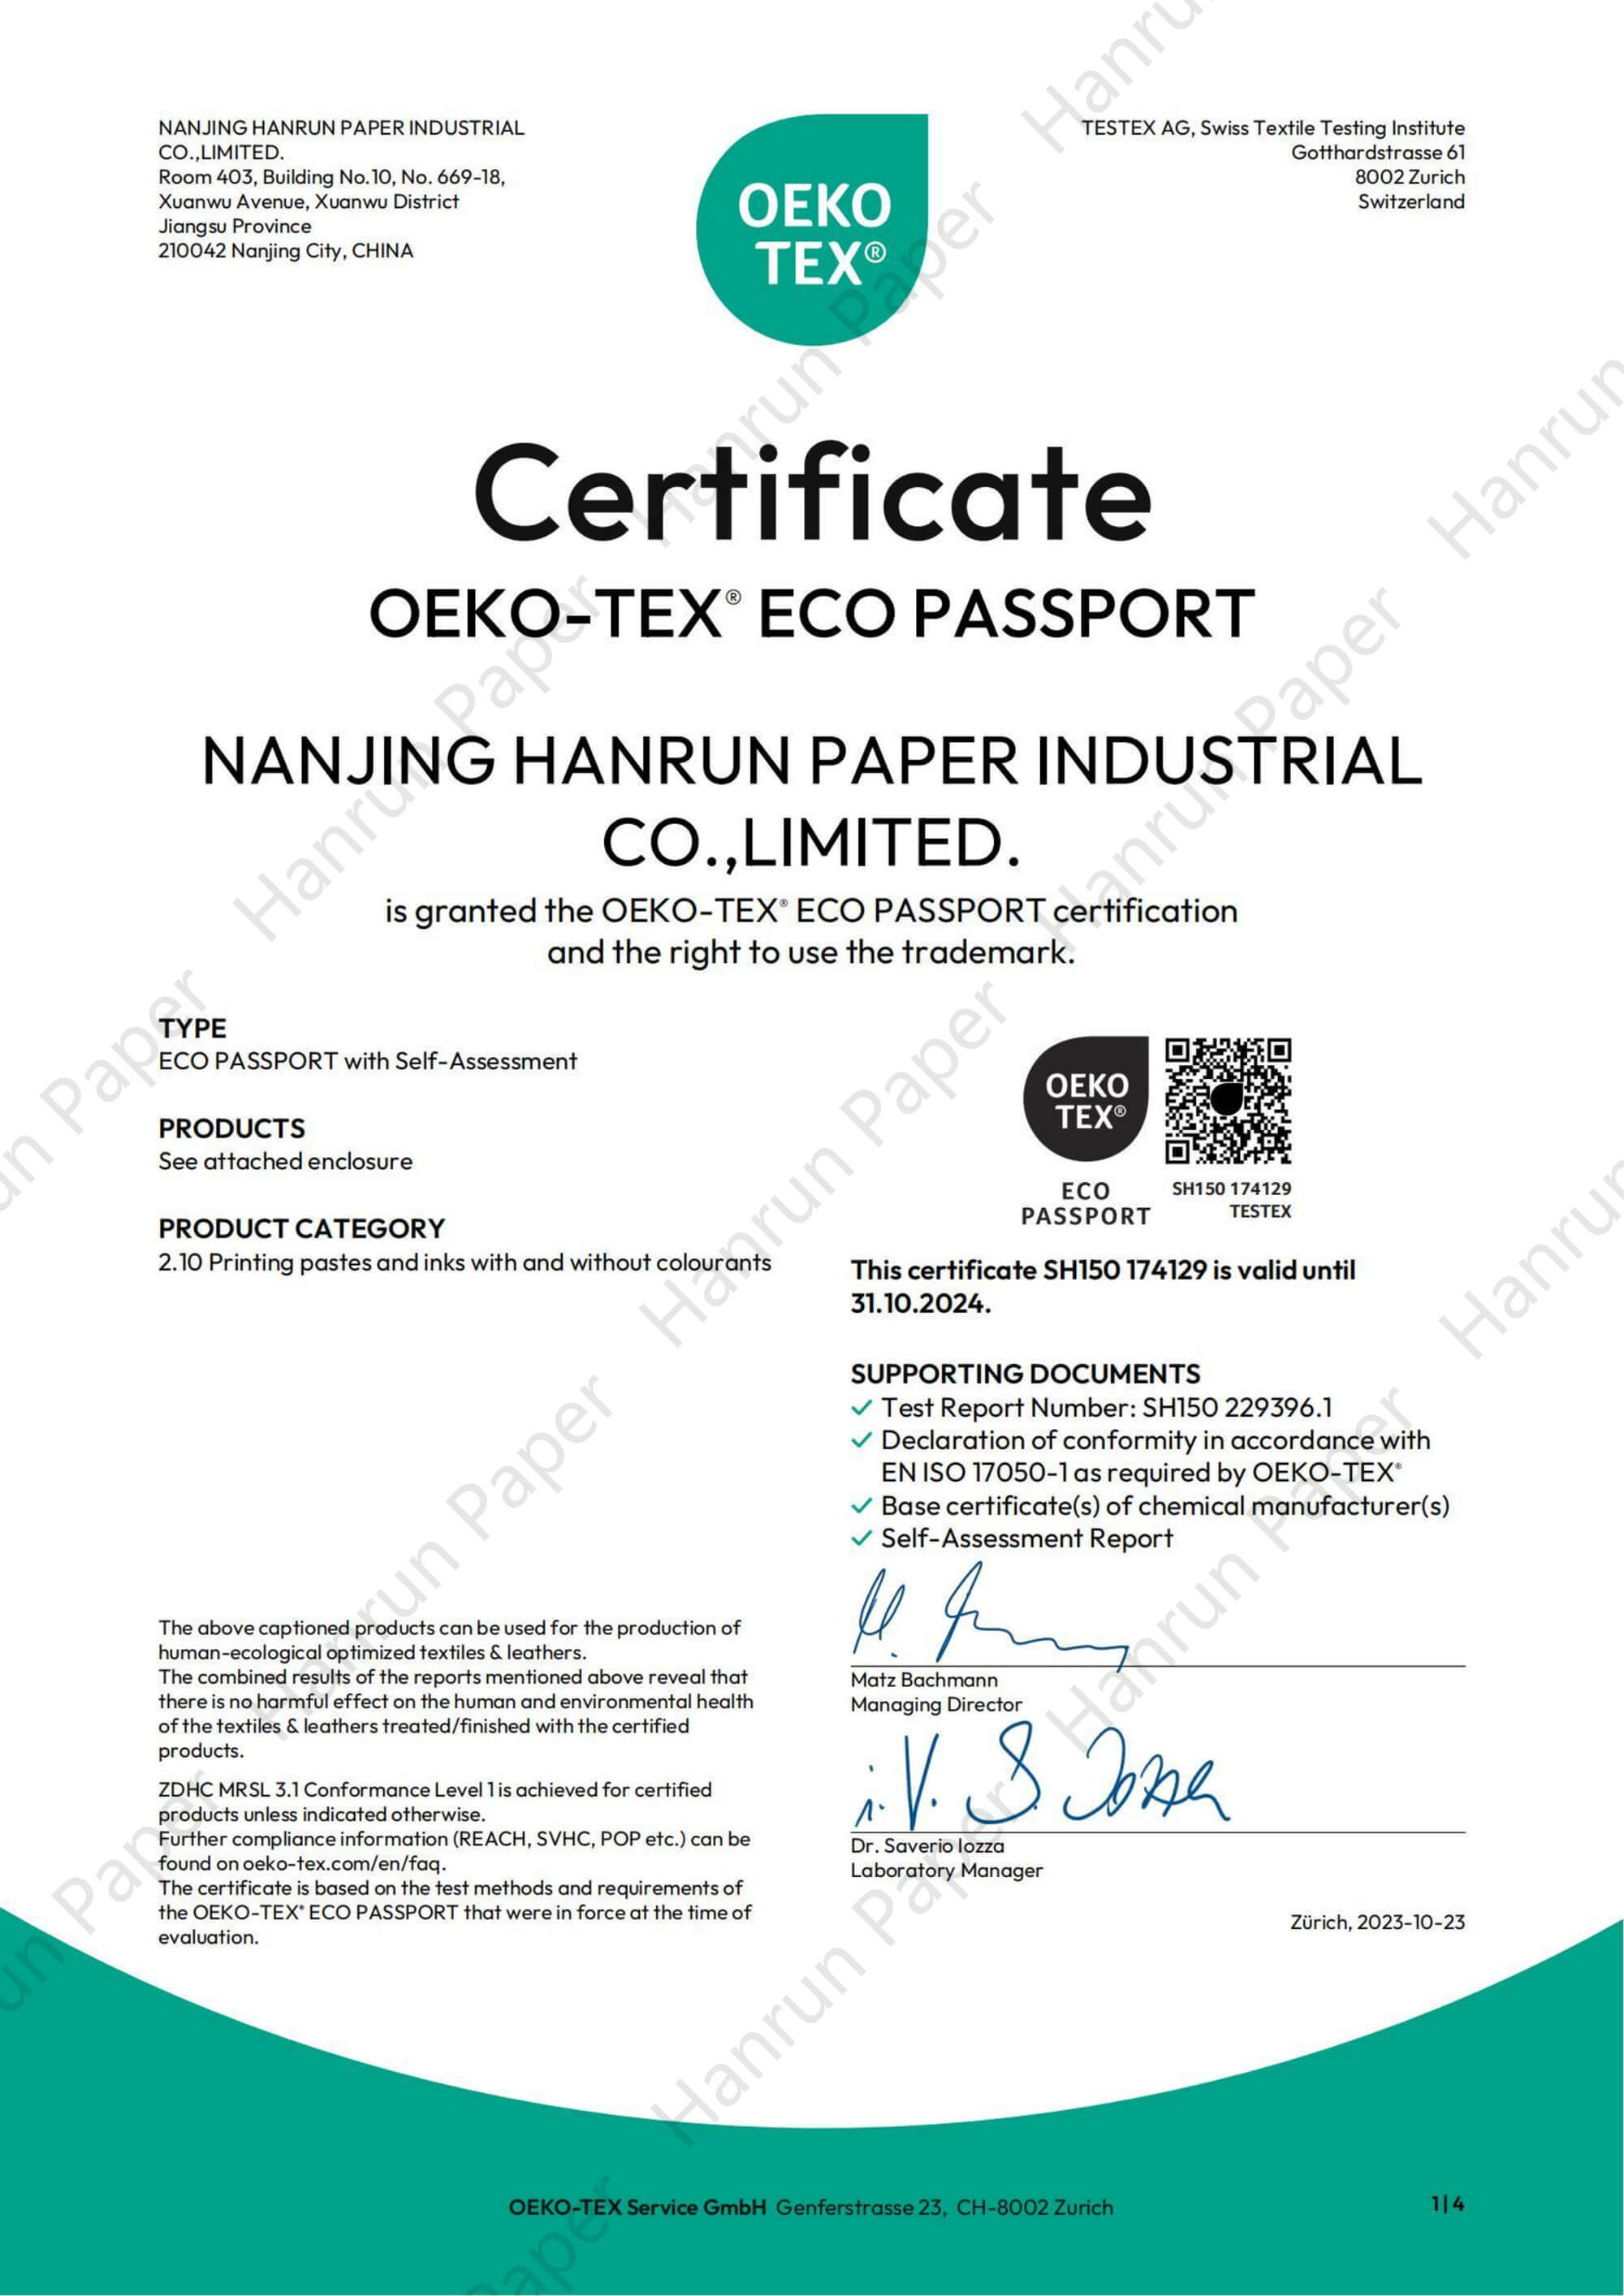 DTF Company with OEKO-TEX Eco Passport Certification for Ink, Film Rol